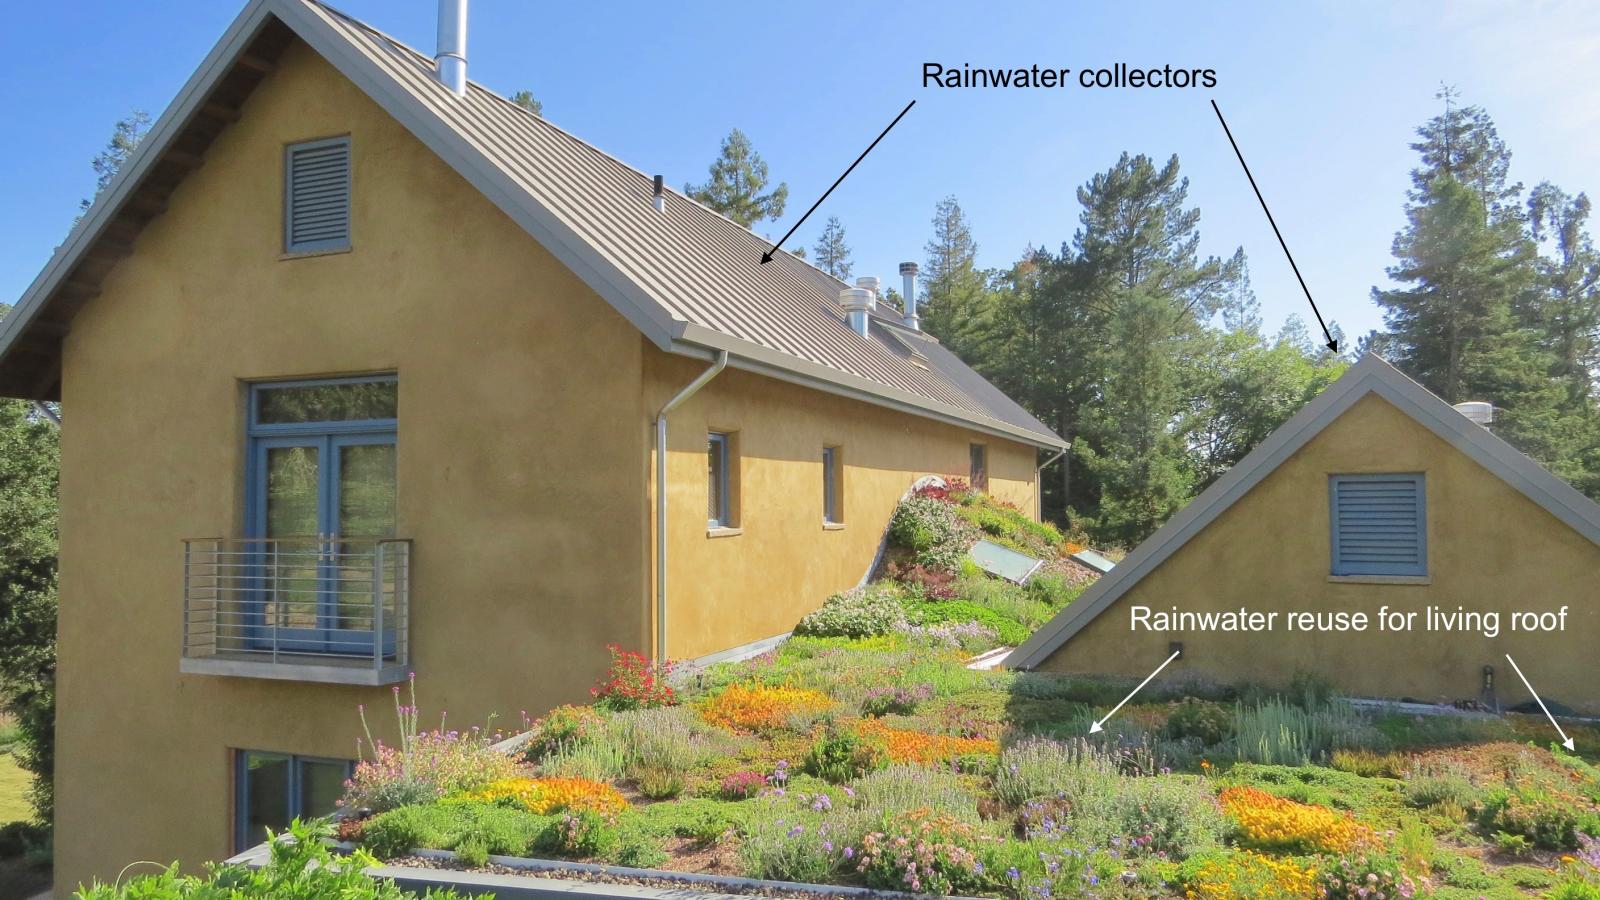 Rainwater collection and irrigation of living roof